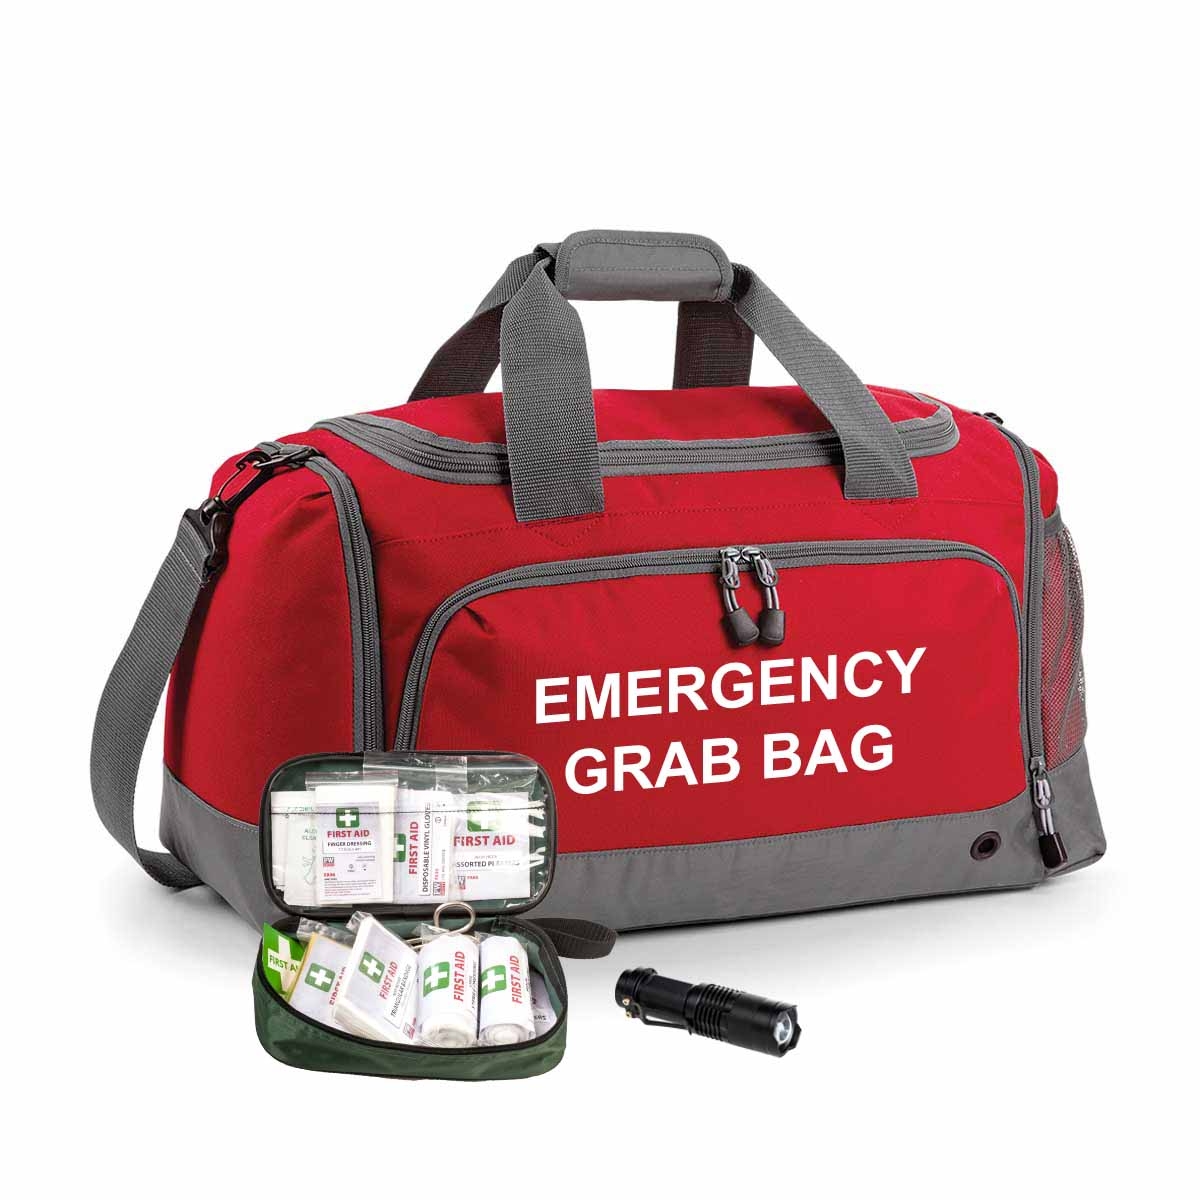 Emergency Grab Bag Guide for Health & Safety in Workplace